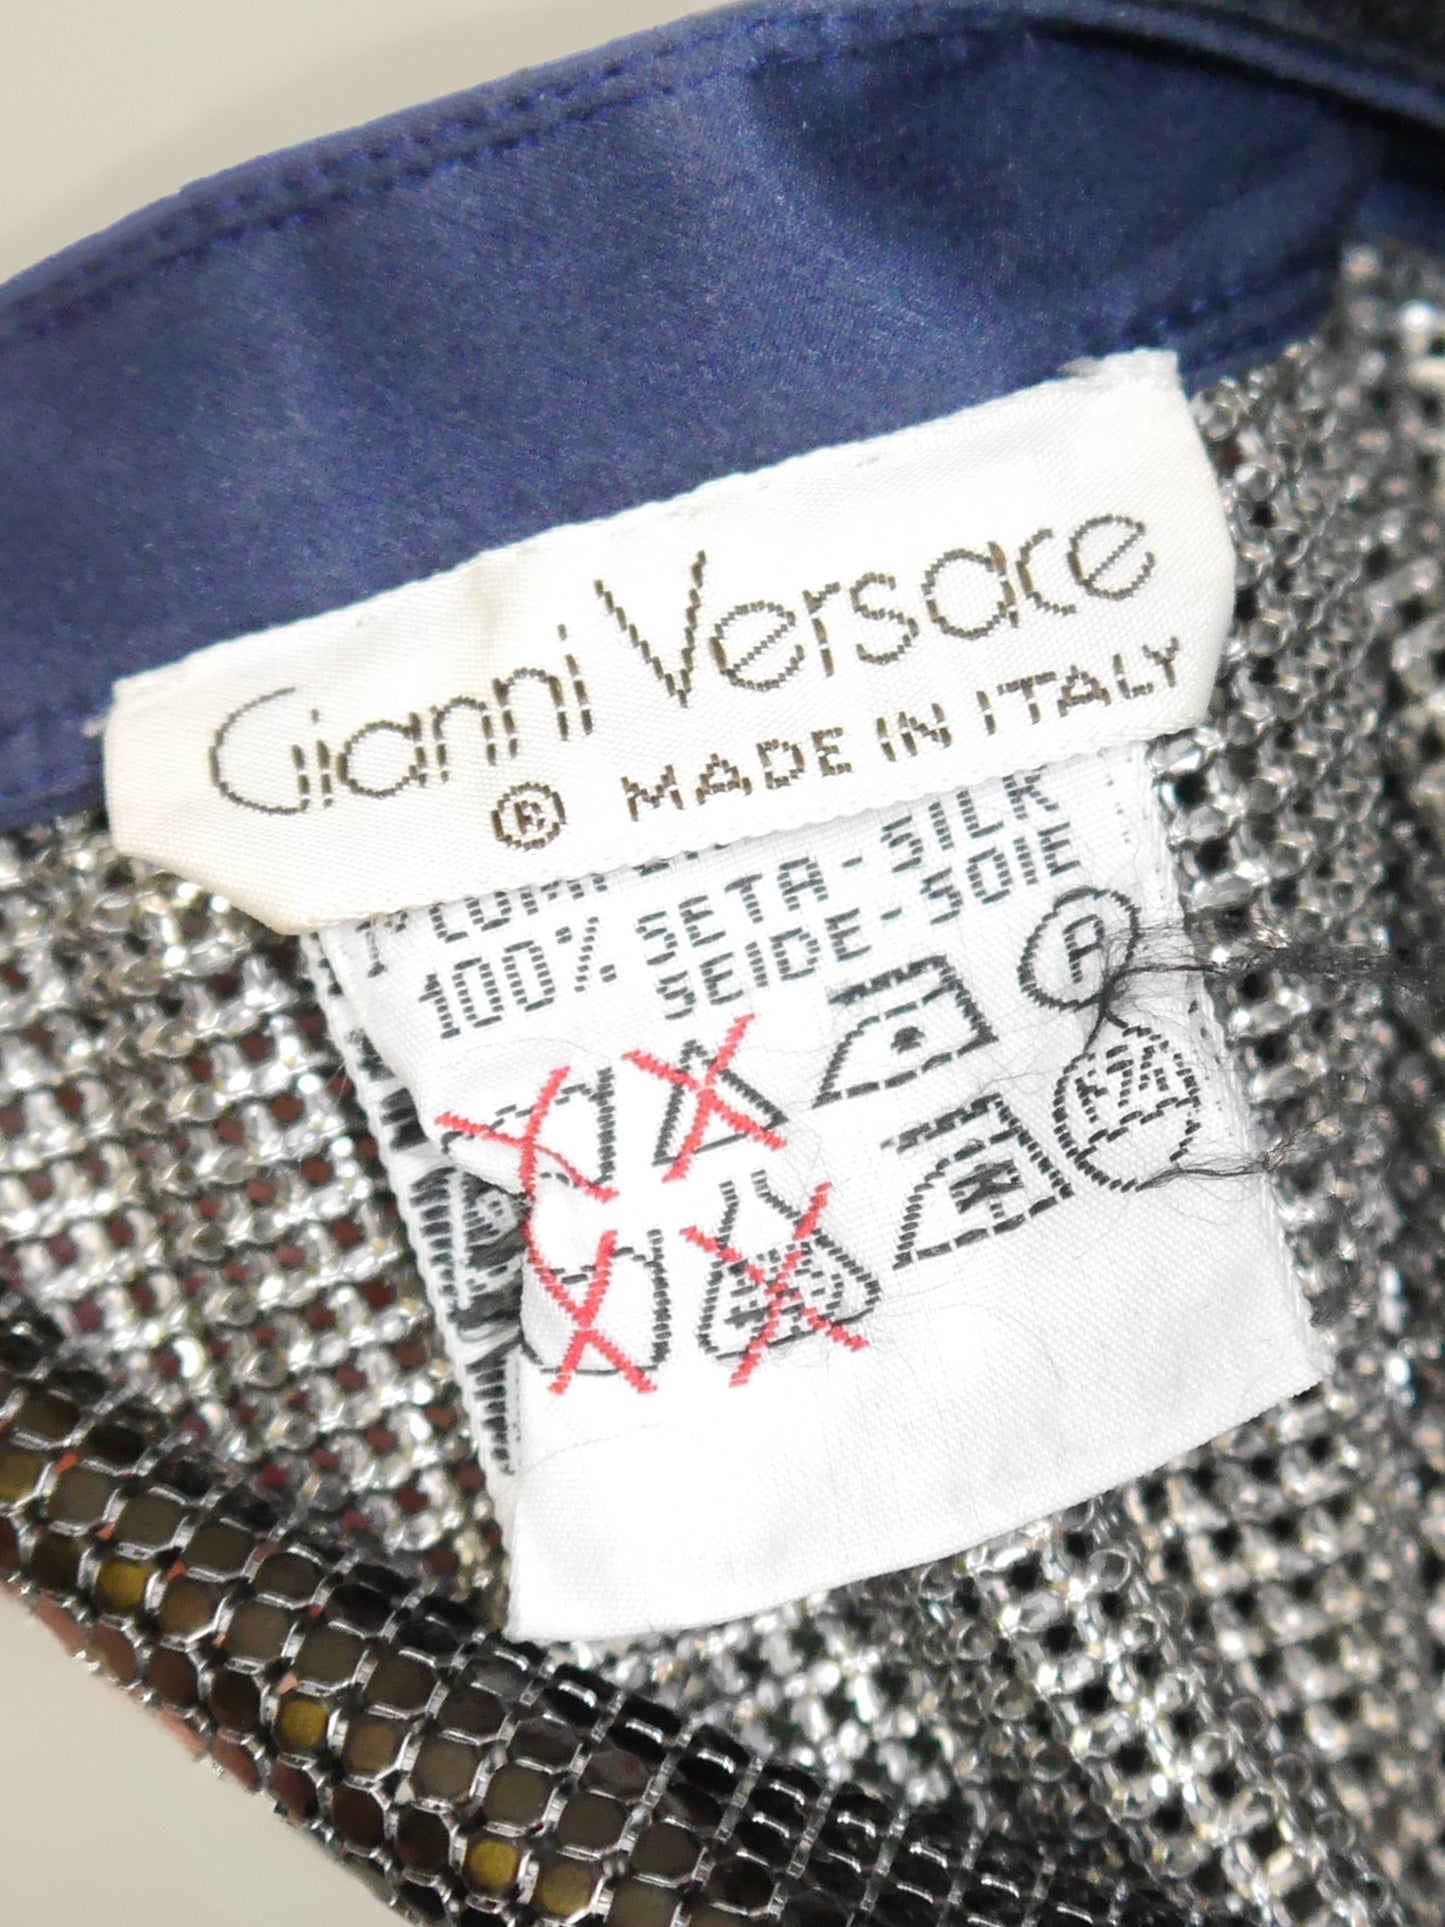 GIANNI VERSACE c. Spring 1984 Oroton Chainmail Halterneck Dress Size S